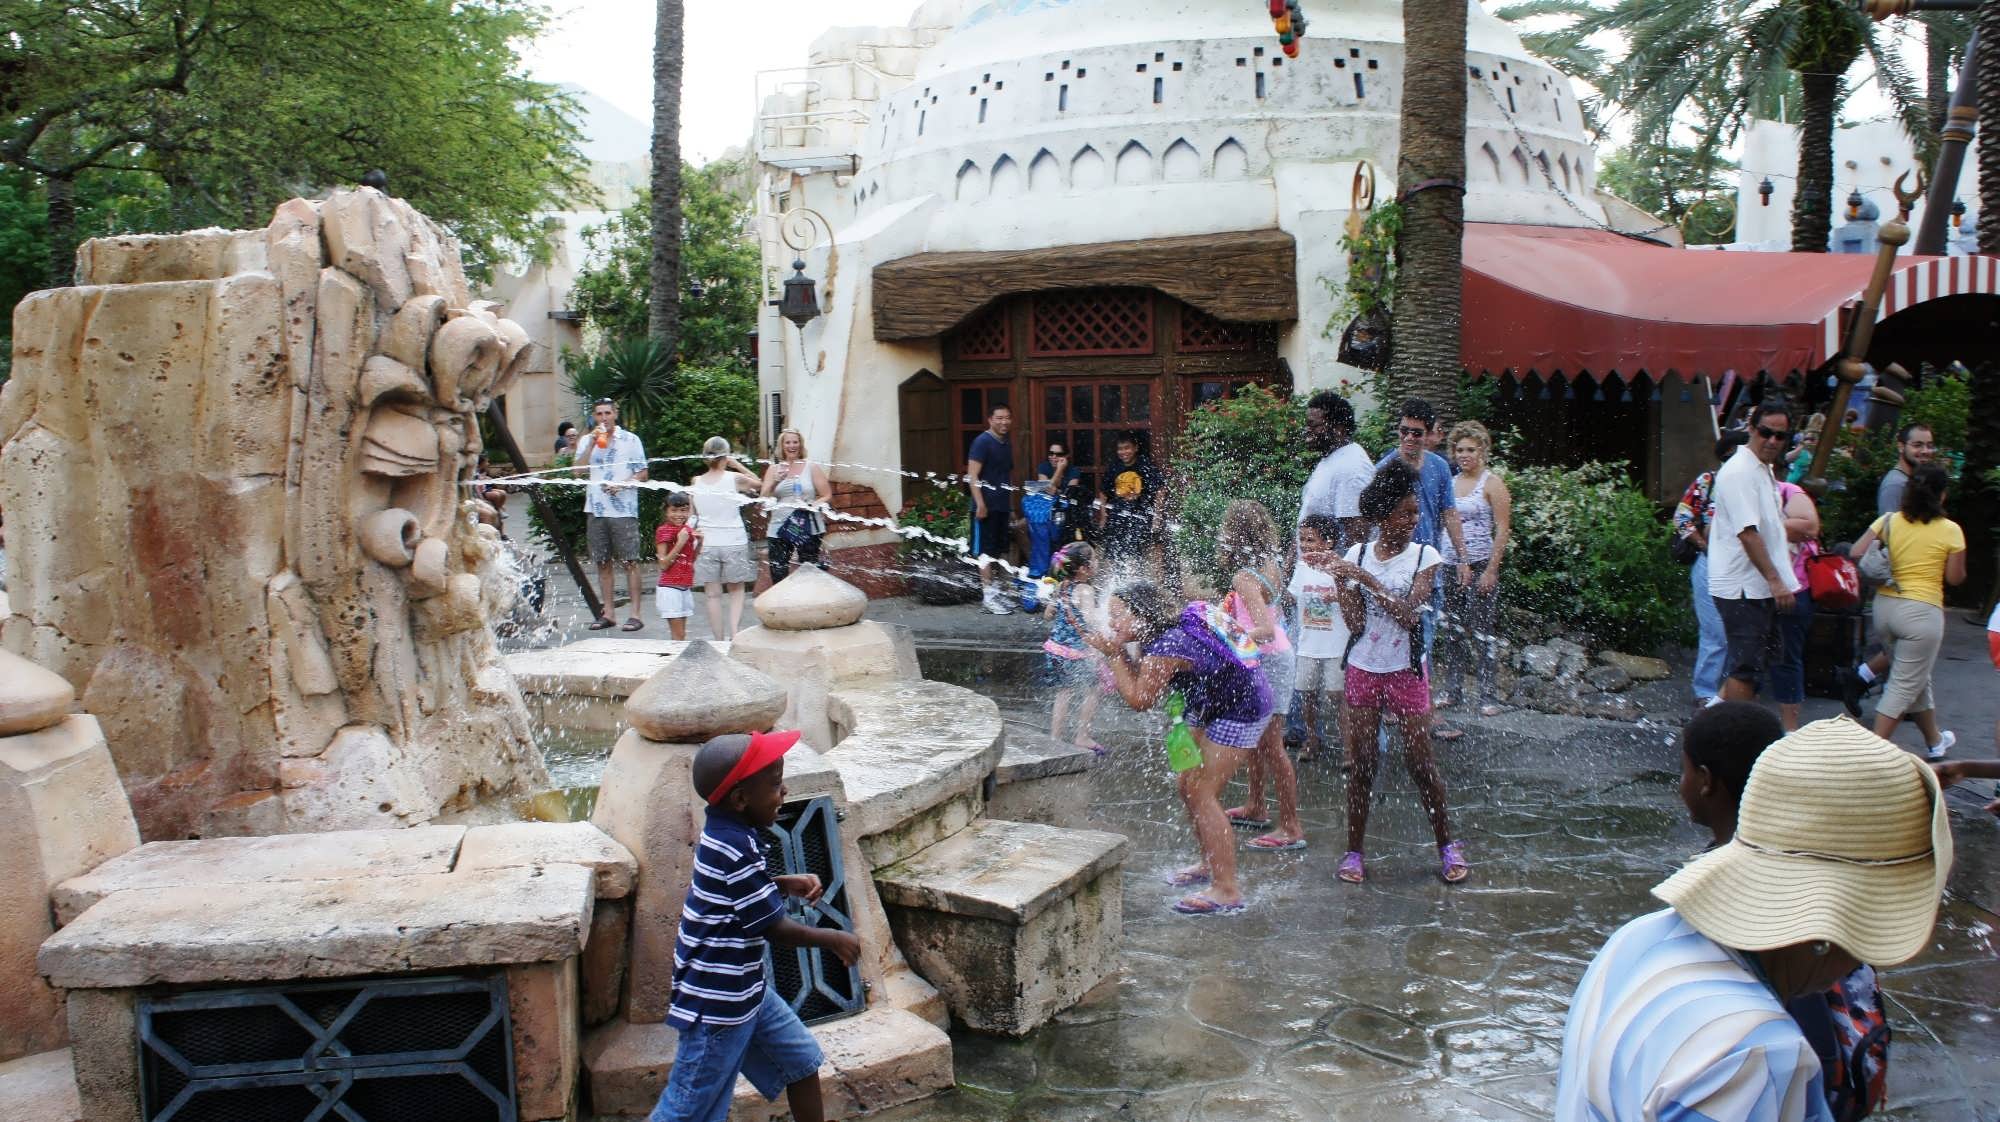 Mystic Fountain at Islands of Adventure